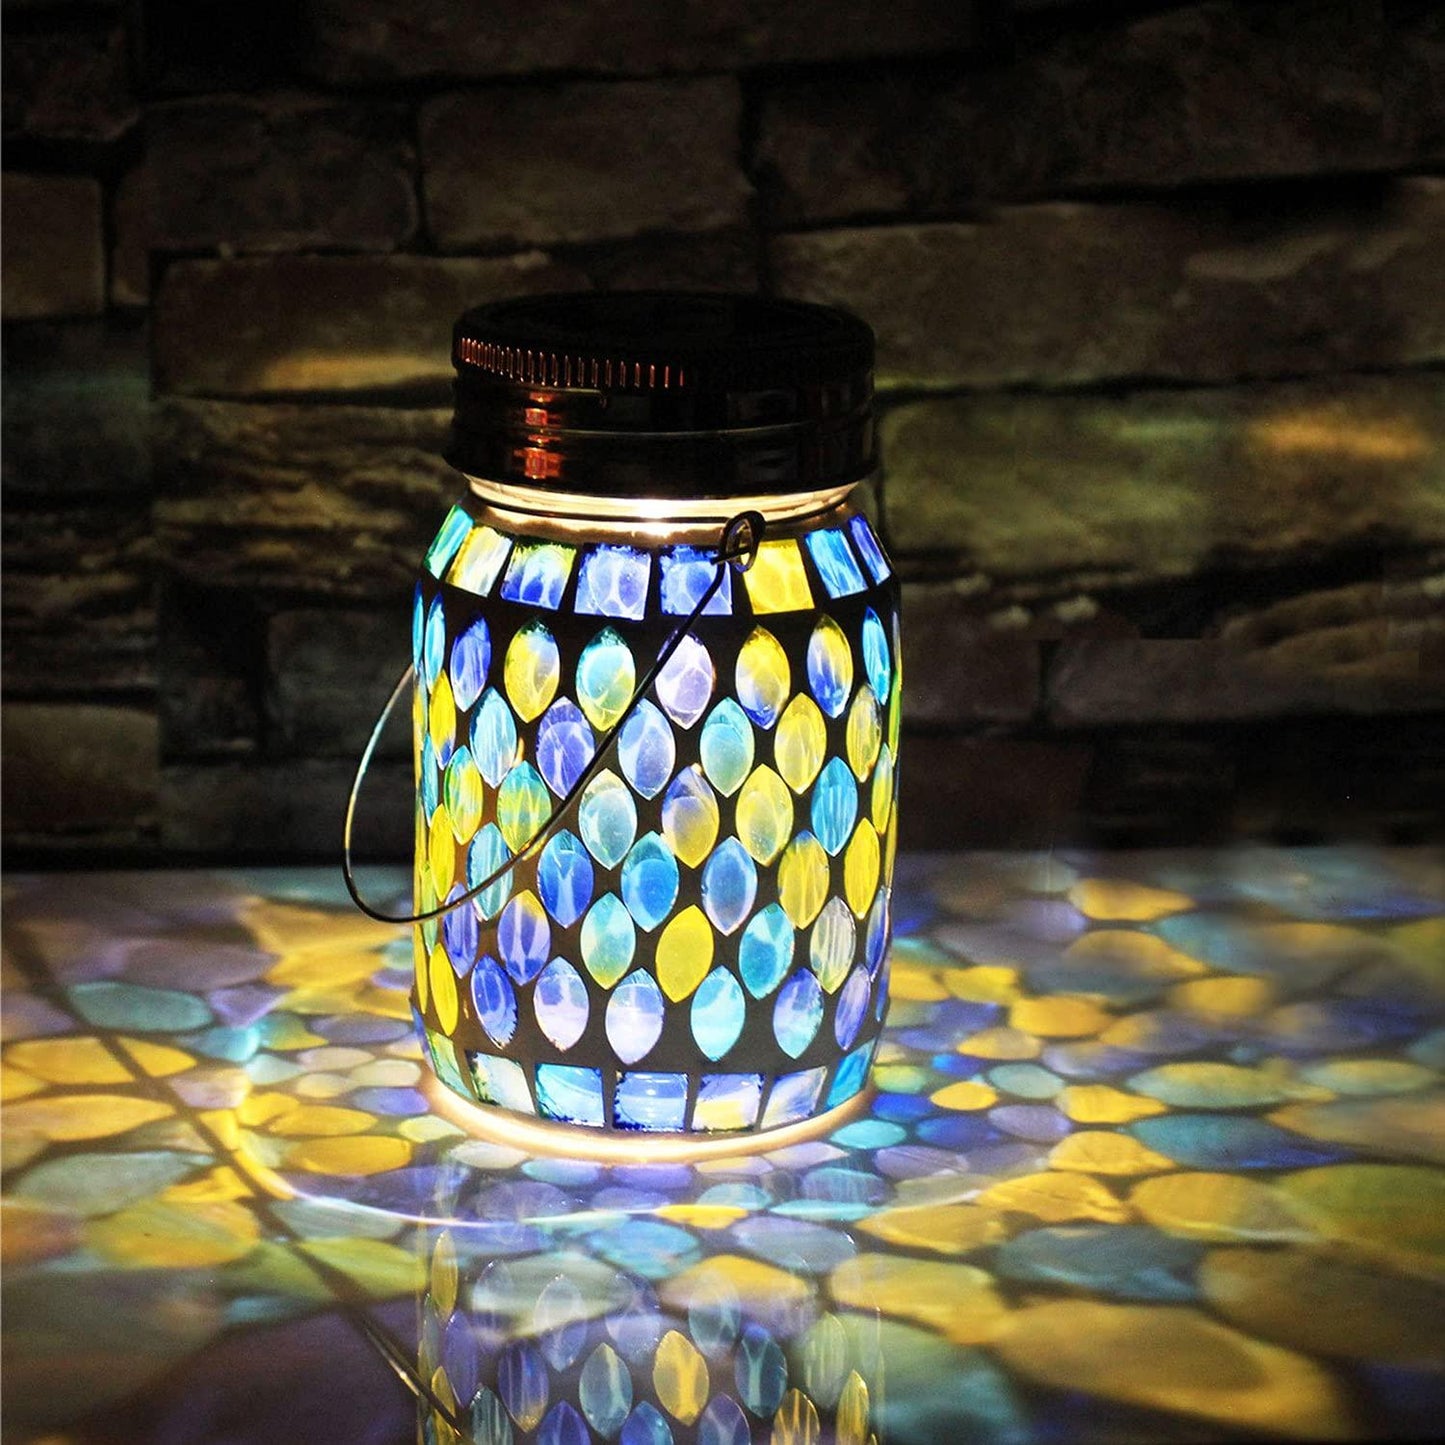 GUANFU Mosaic Solar Lanterns Outdoor Hanging Lights, Solar Table Lamps & Cool Blue Color Mosaic Glass Lights, Outdoor Waterproof Solar Night Lights, Garden,Patio,Pathway & Yard Décor - CookCave